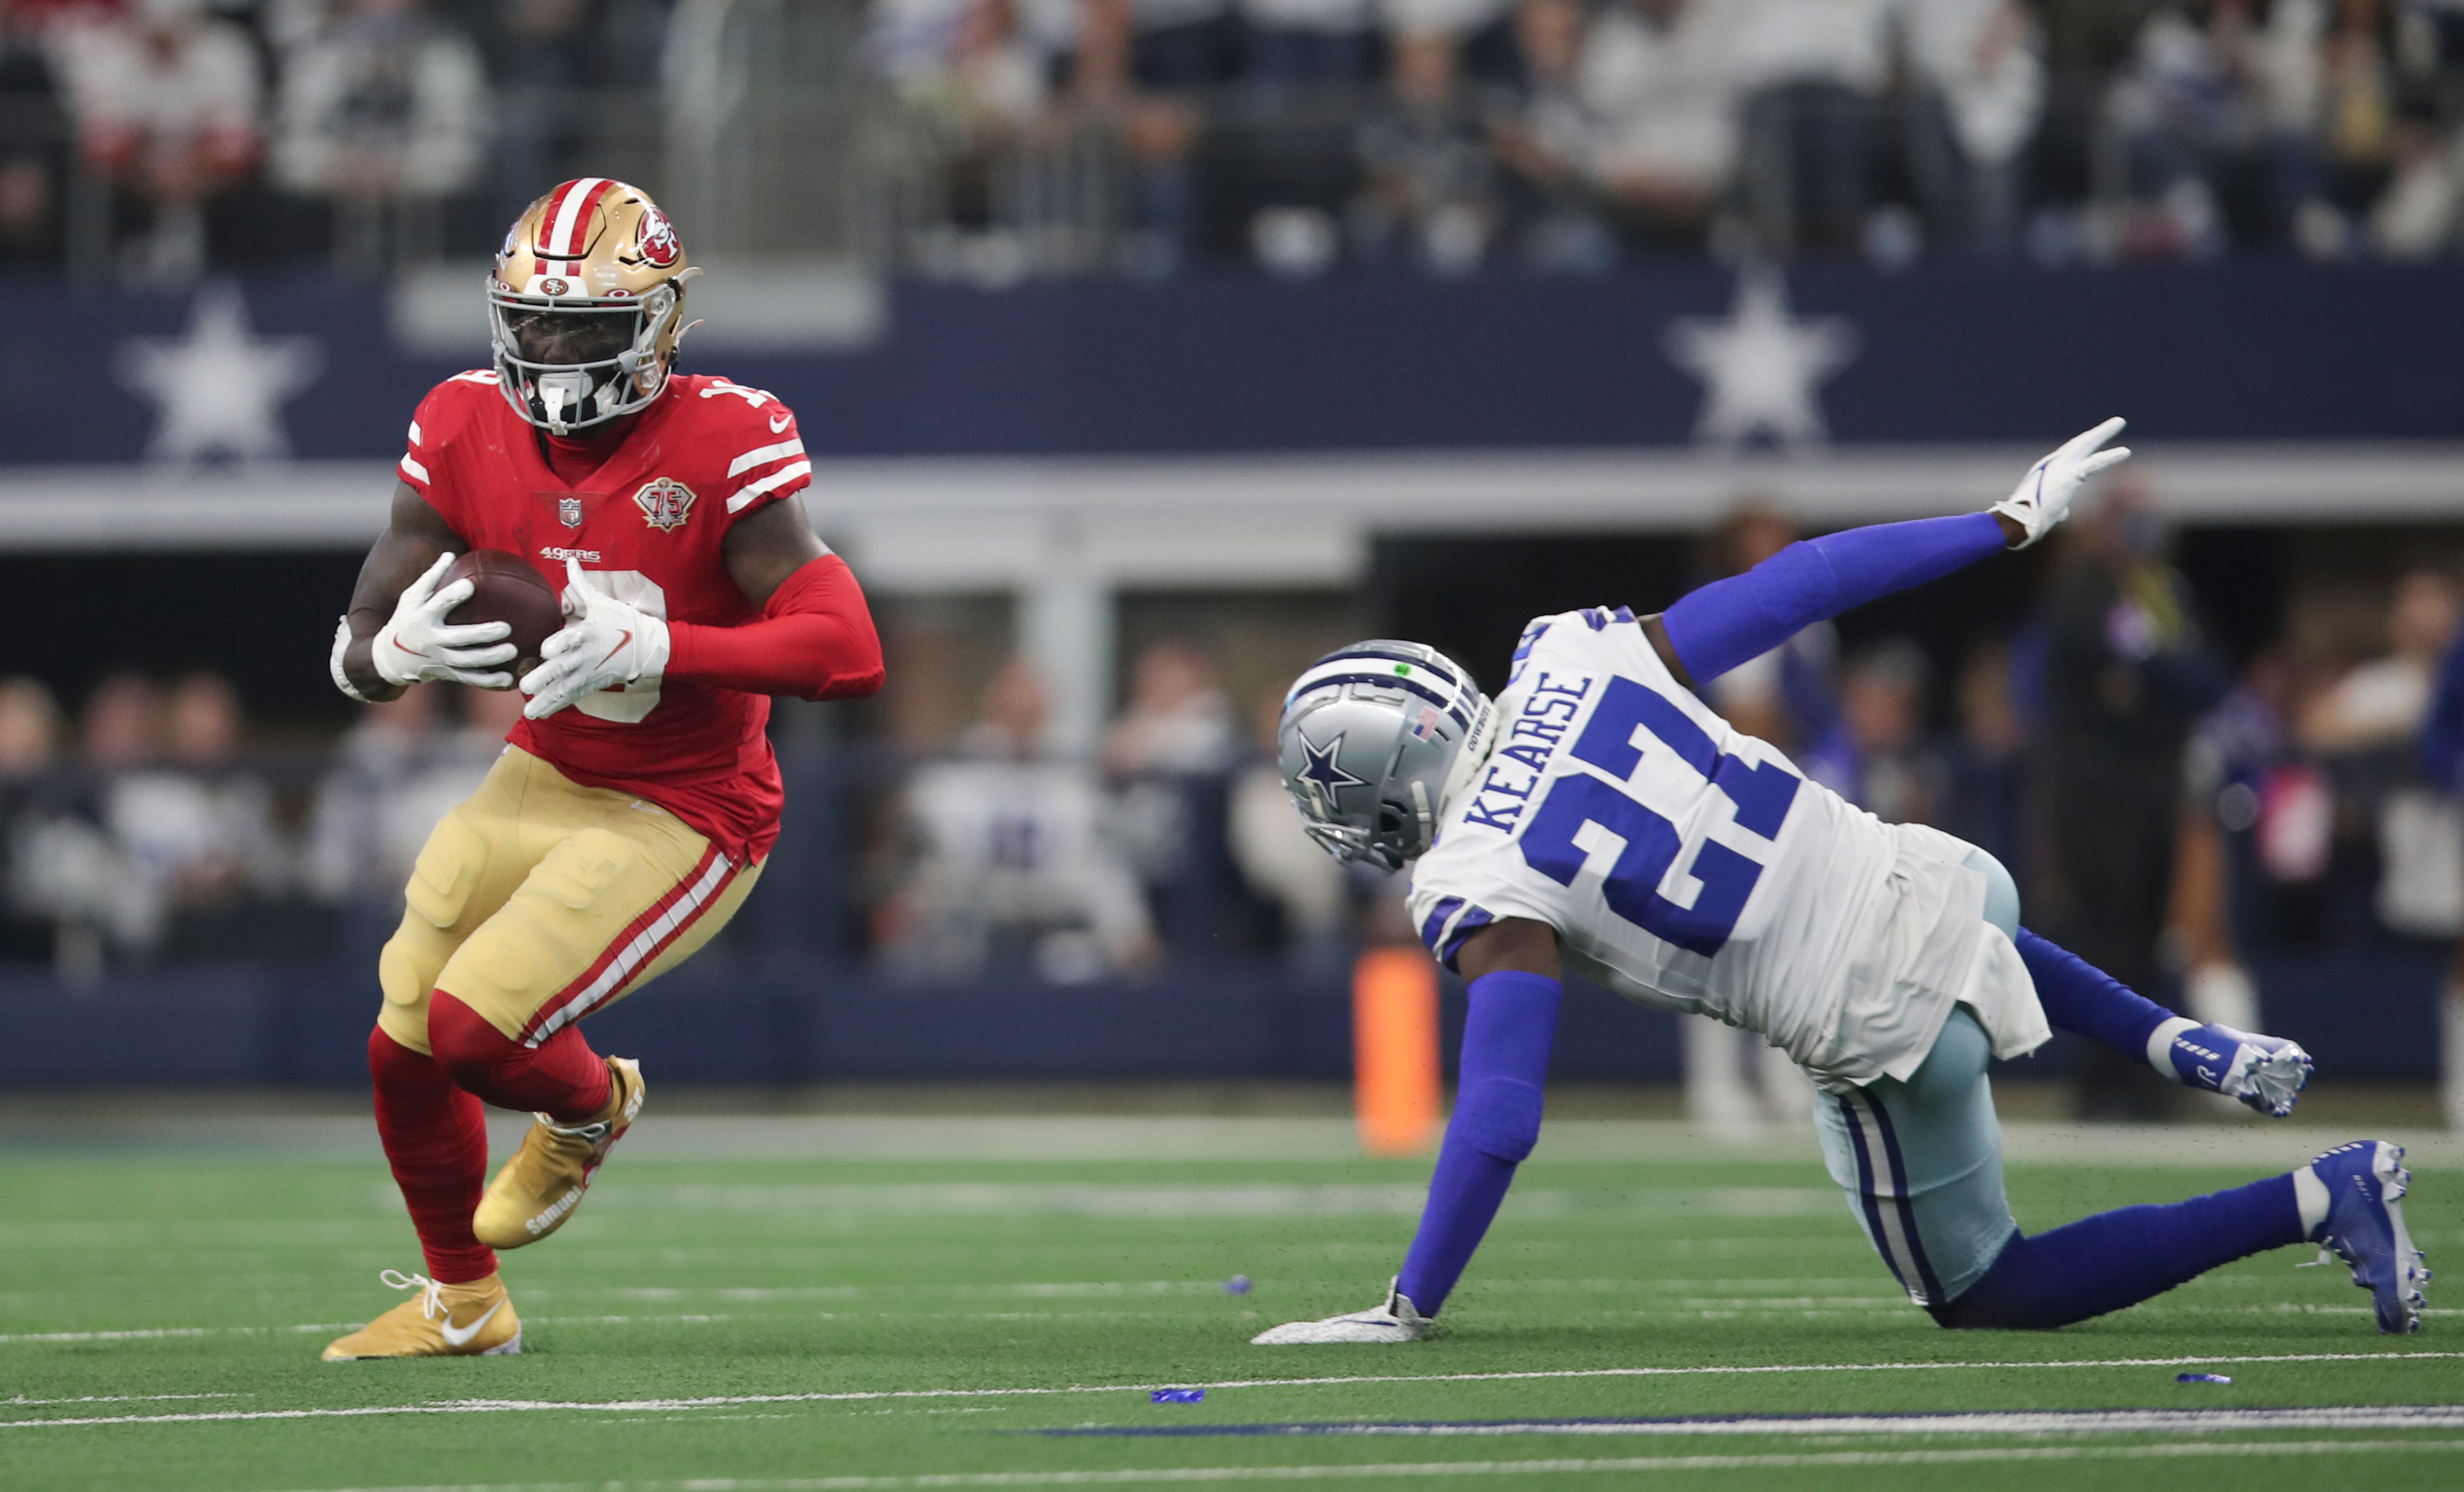 Deebo Samuel #19 of the San Francisco 49ers runs after making a catch during the NFC Wild Card Playoff game against the Dallas Cowboys at AT&amp;T Stadium on January 16, 2022 in Arlington, Texas. The 49ers defeated the Cowboys 23-17.